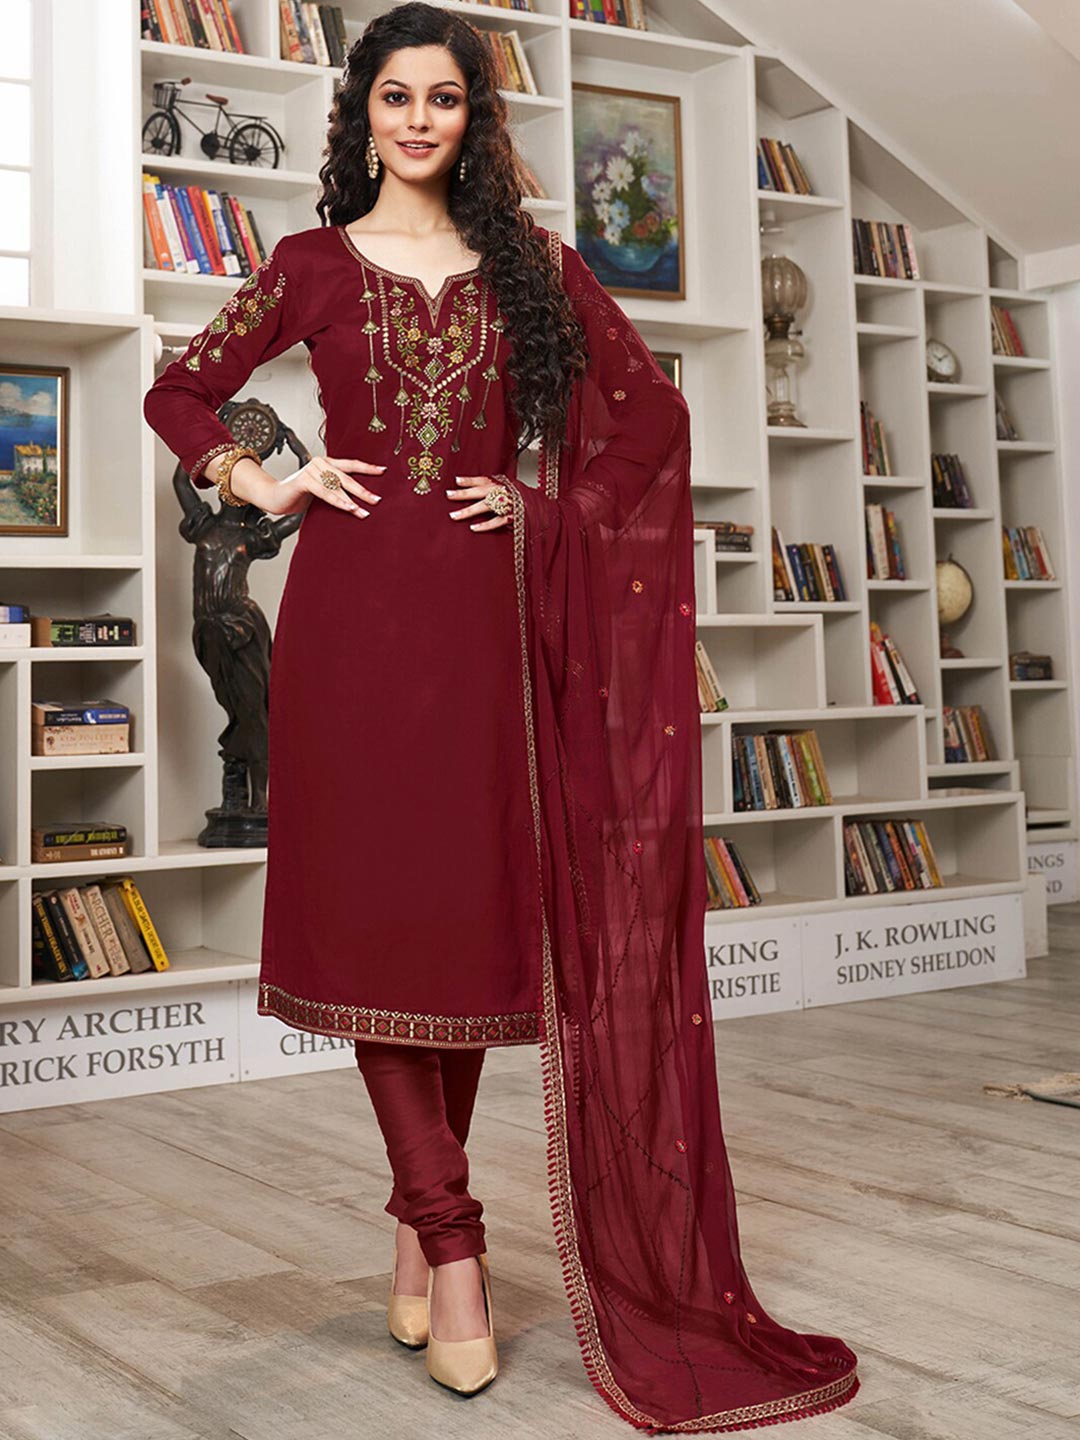 Shaily Maroon Embroidered Pure Cotton Unstitched Dress Material Price in India